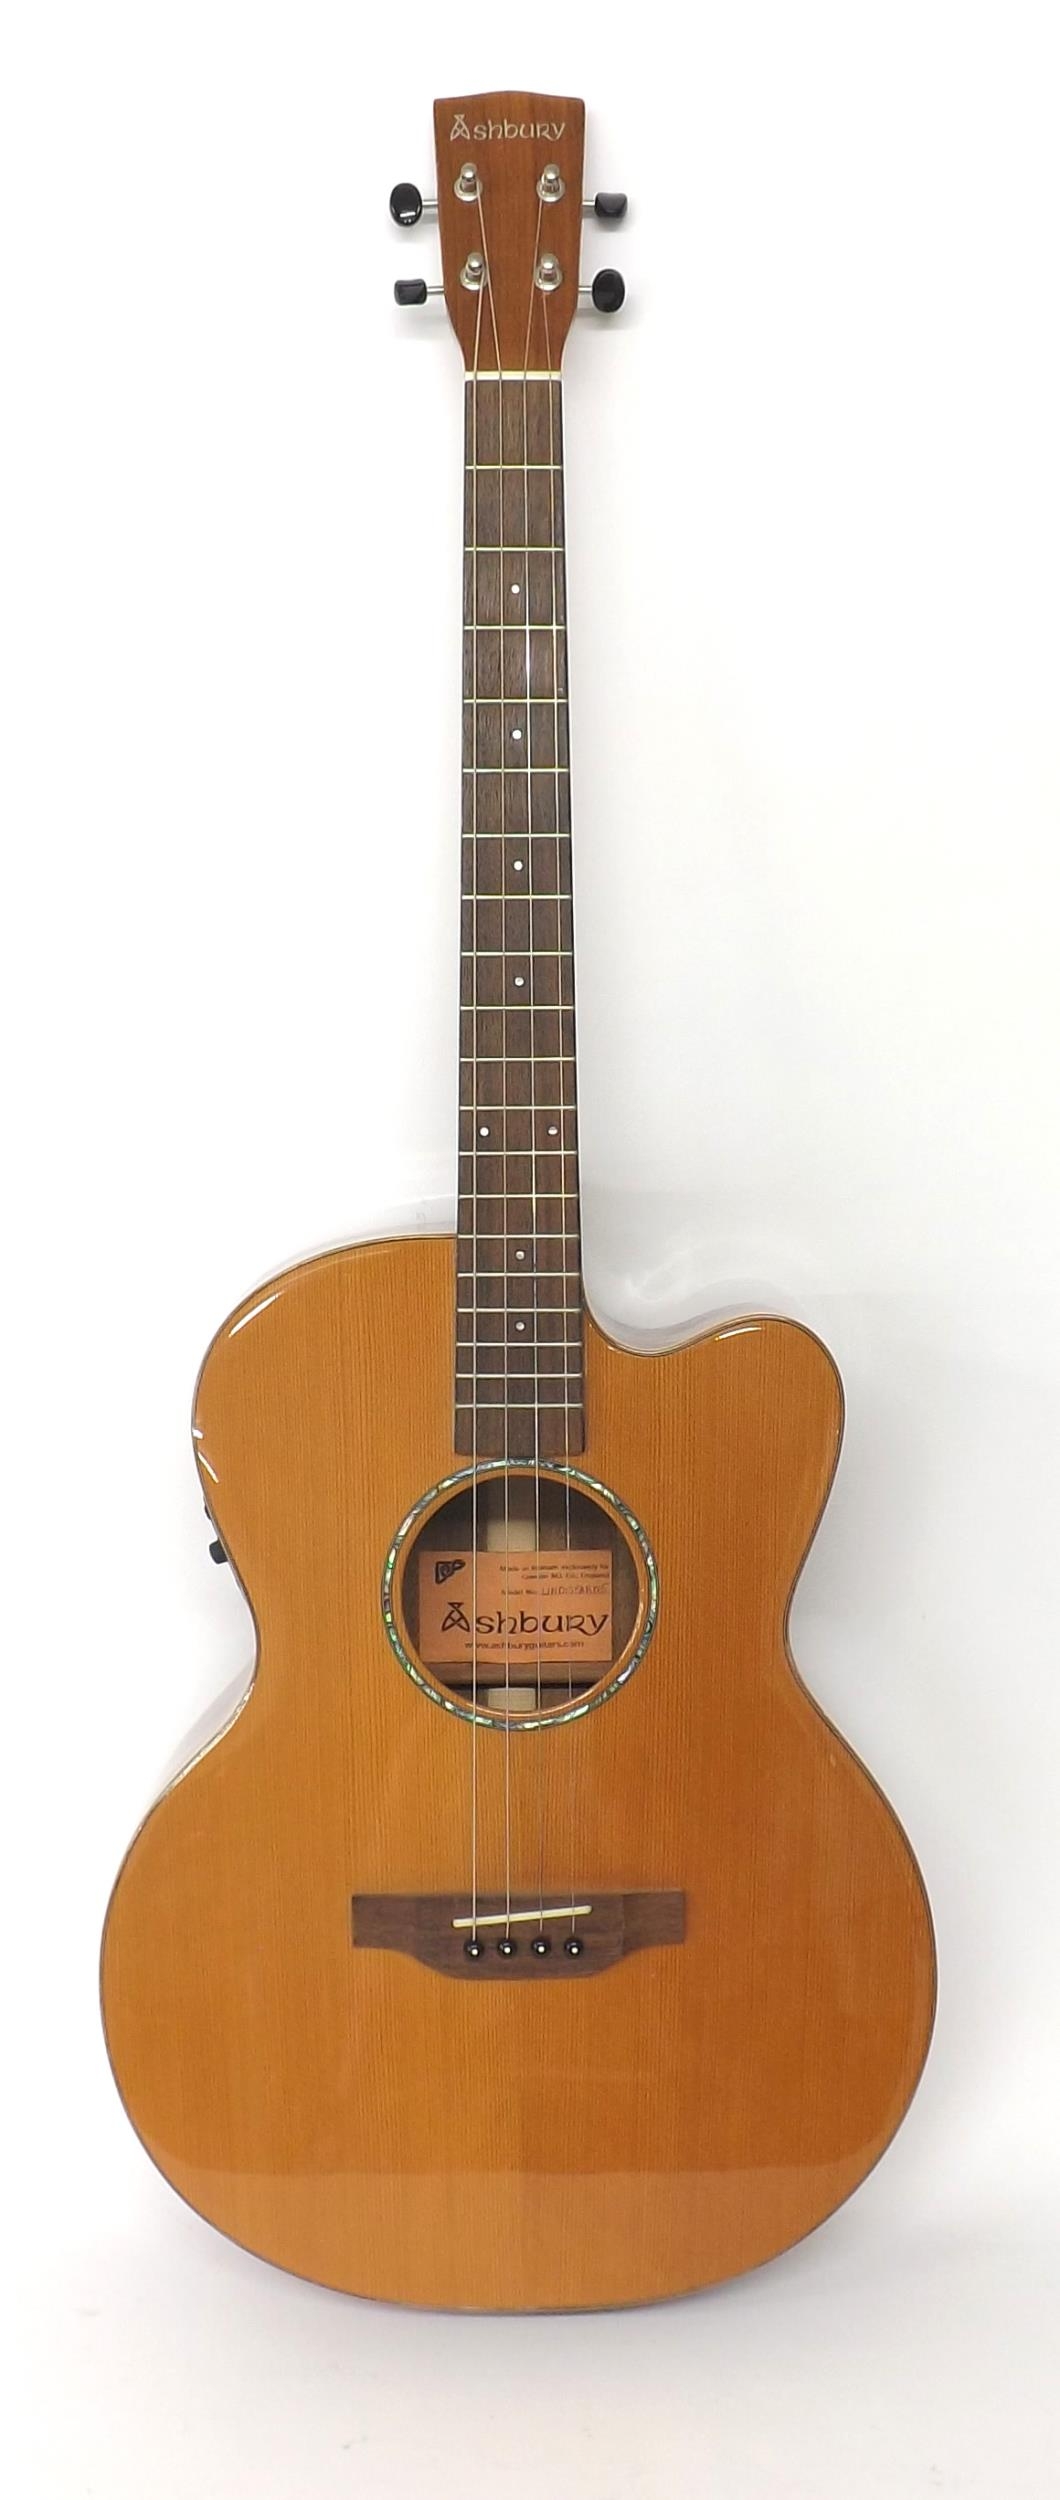 Contemporary classical guitar by and labelled Ashbury, model no: Lindisfarne, with cut-away shaped